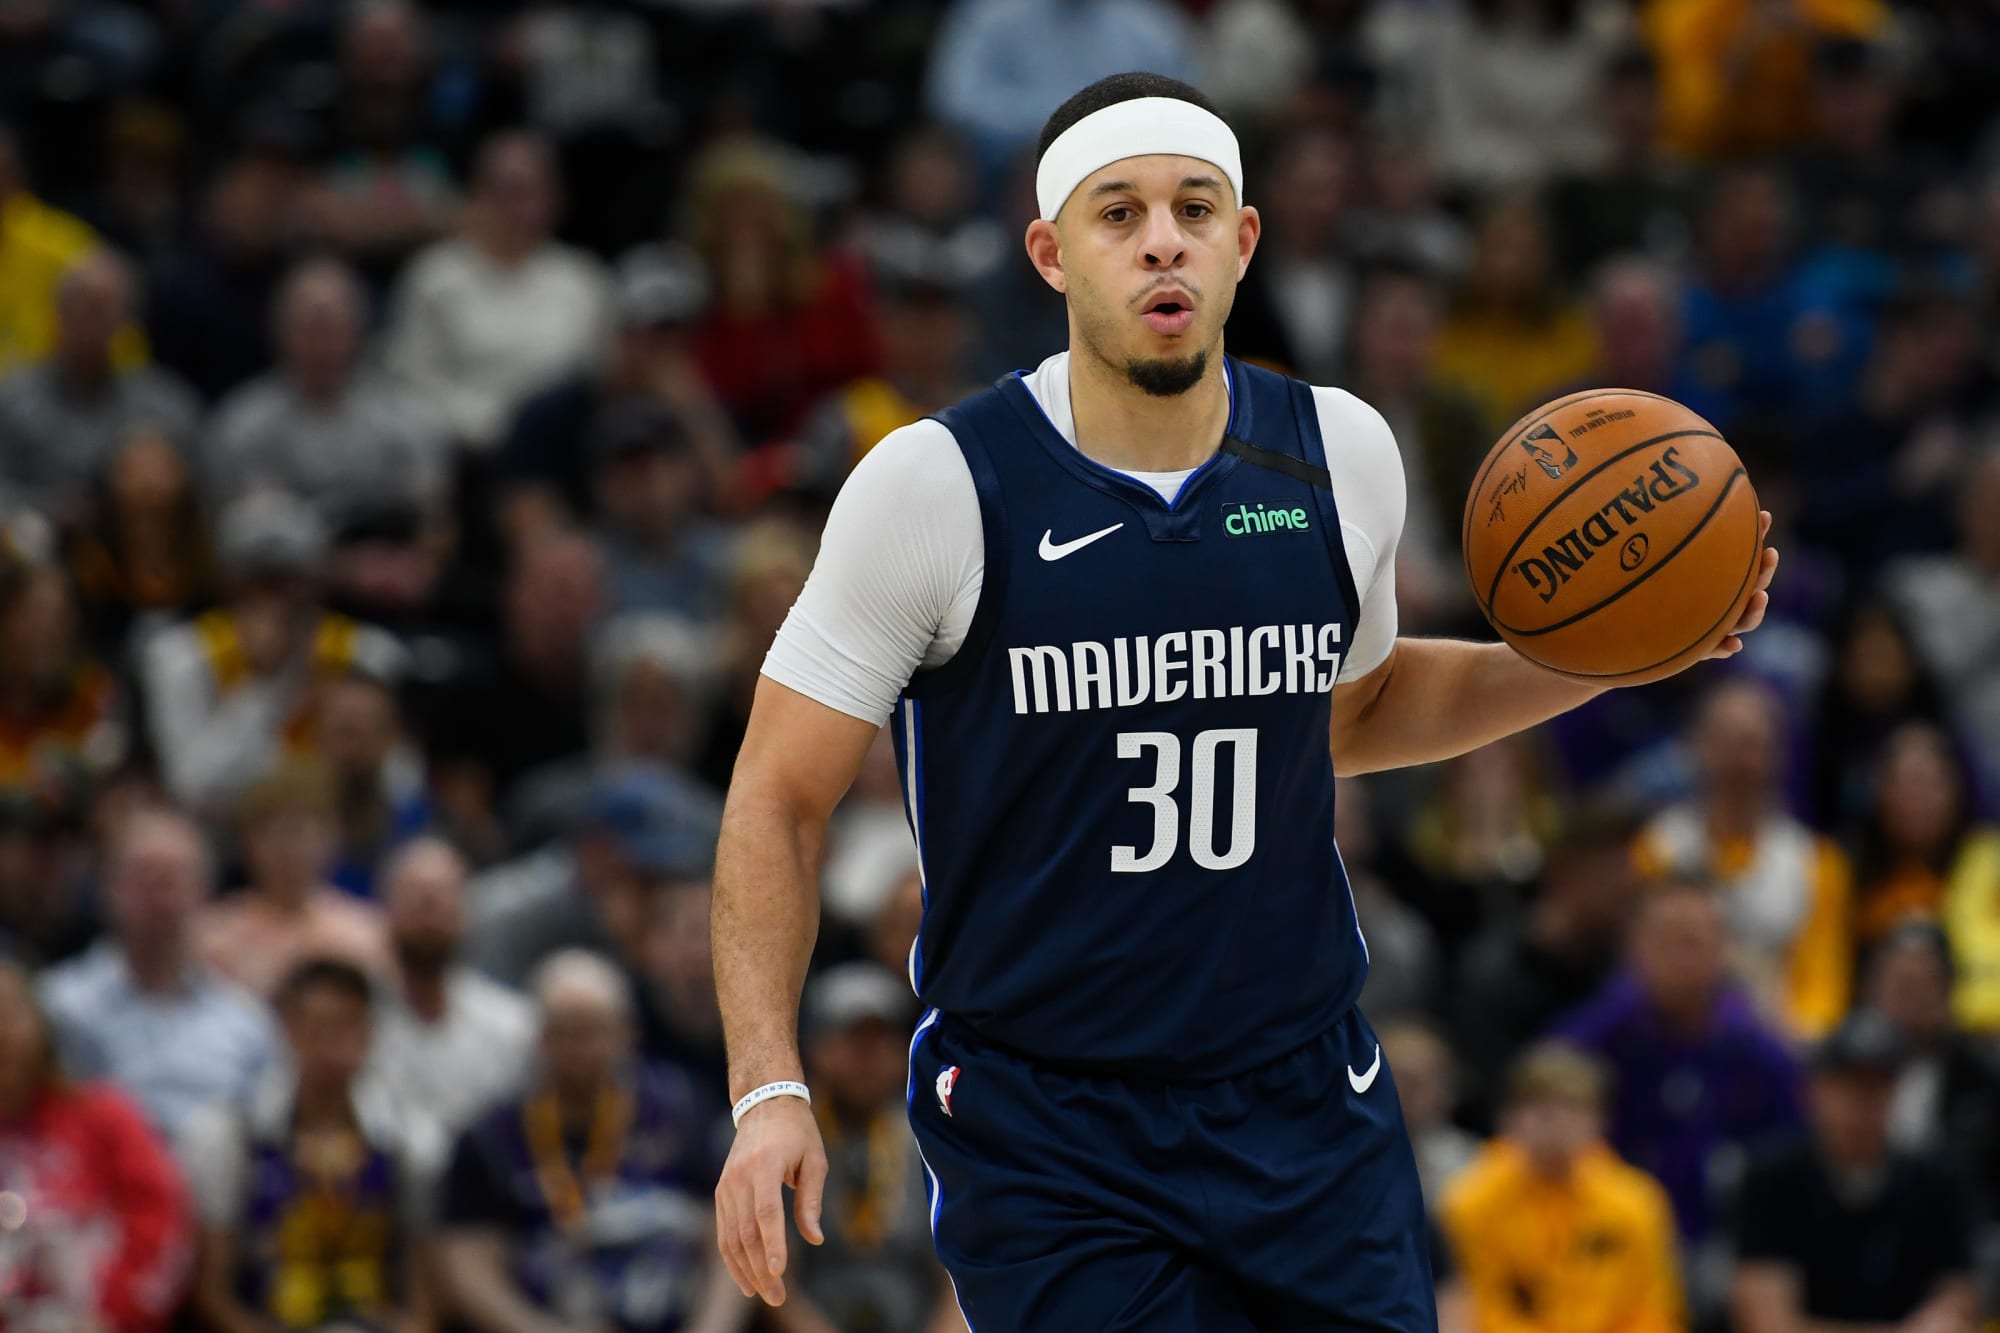 Dallas Mavericks: Seth Curry is taking part in celebrity Madden tournament